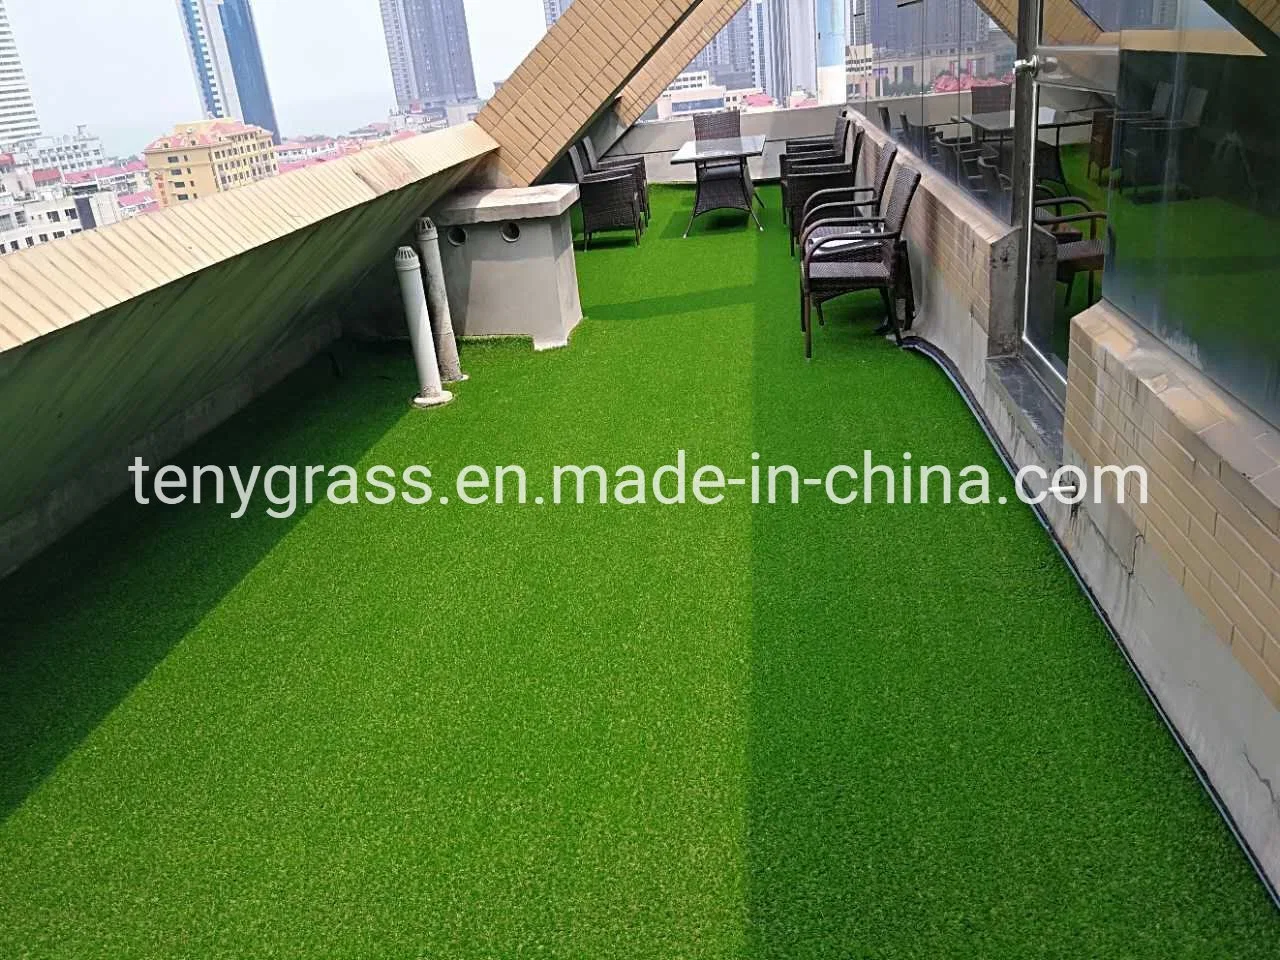 High quality/High cost performance  Soccer Grass Product with 50mm Artificial Grass /Artificial Lawn